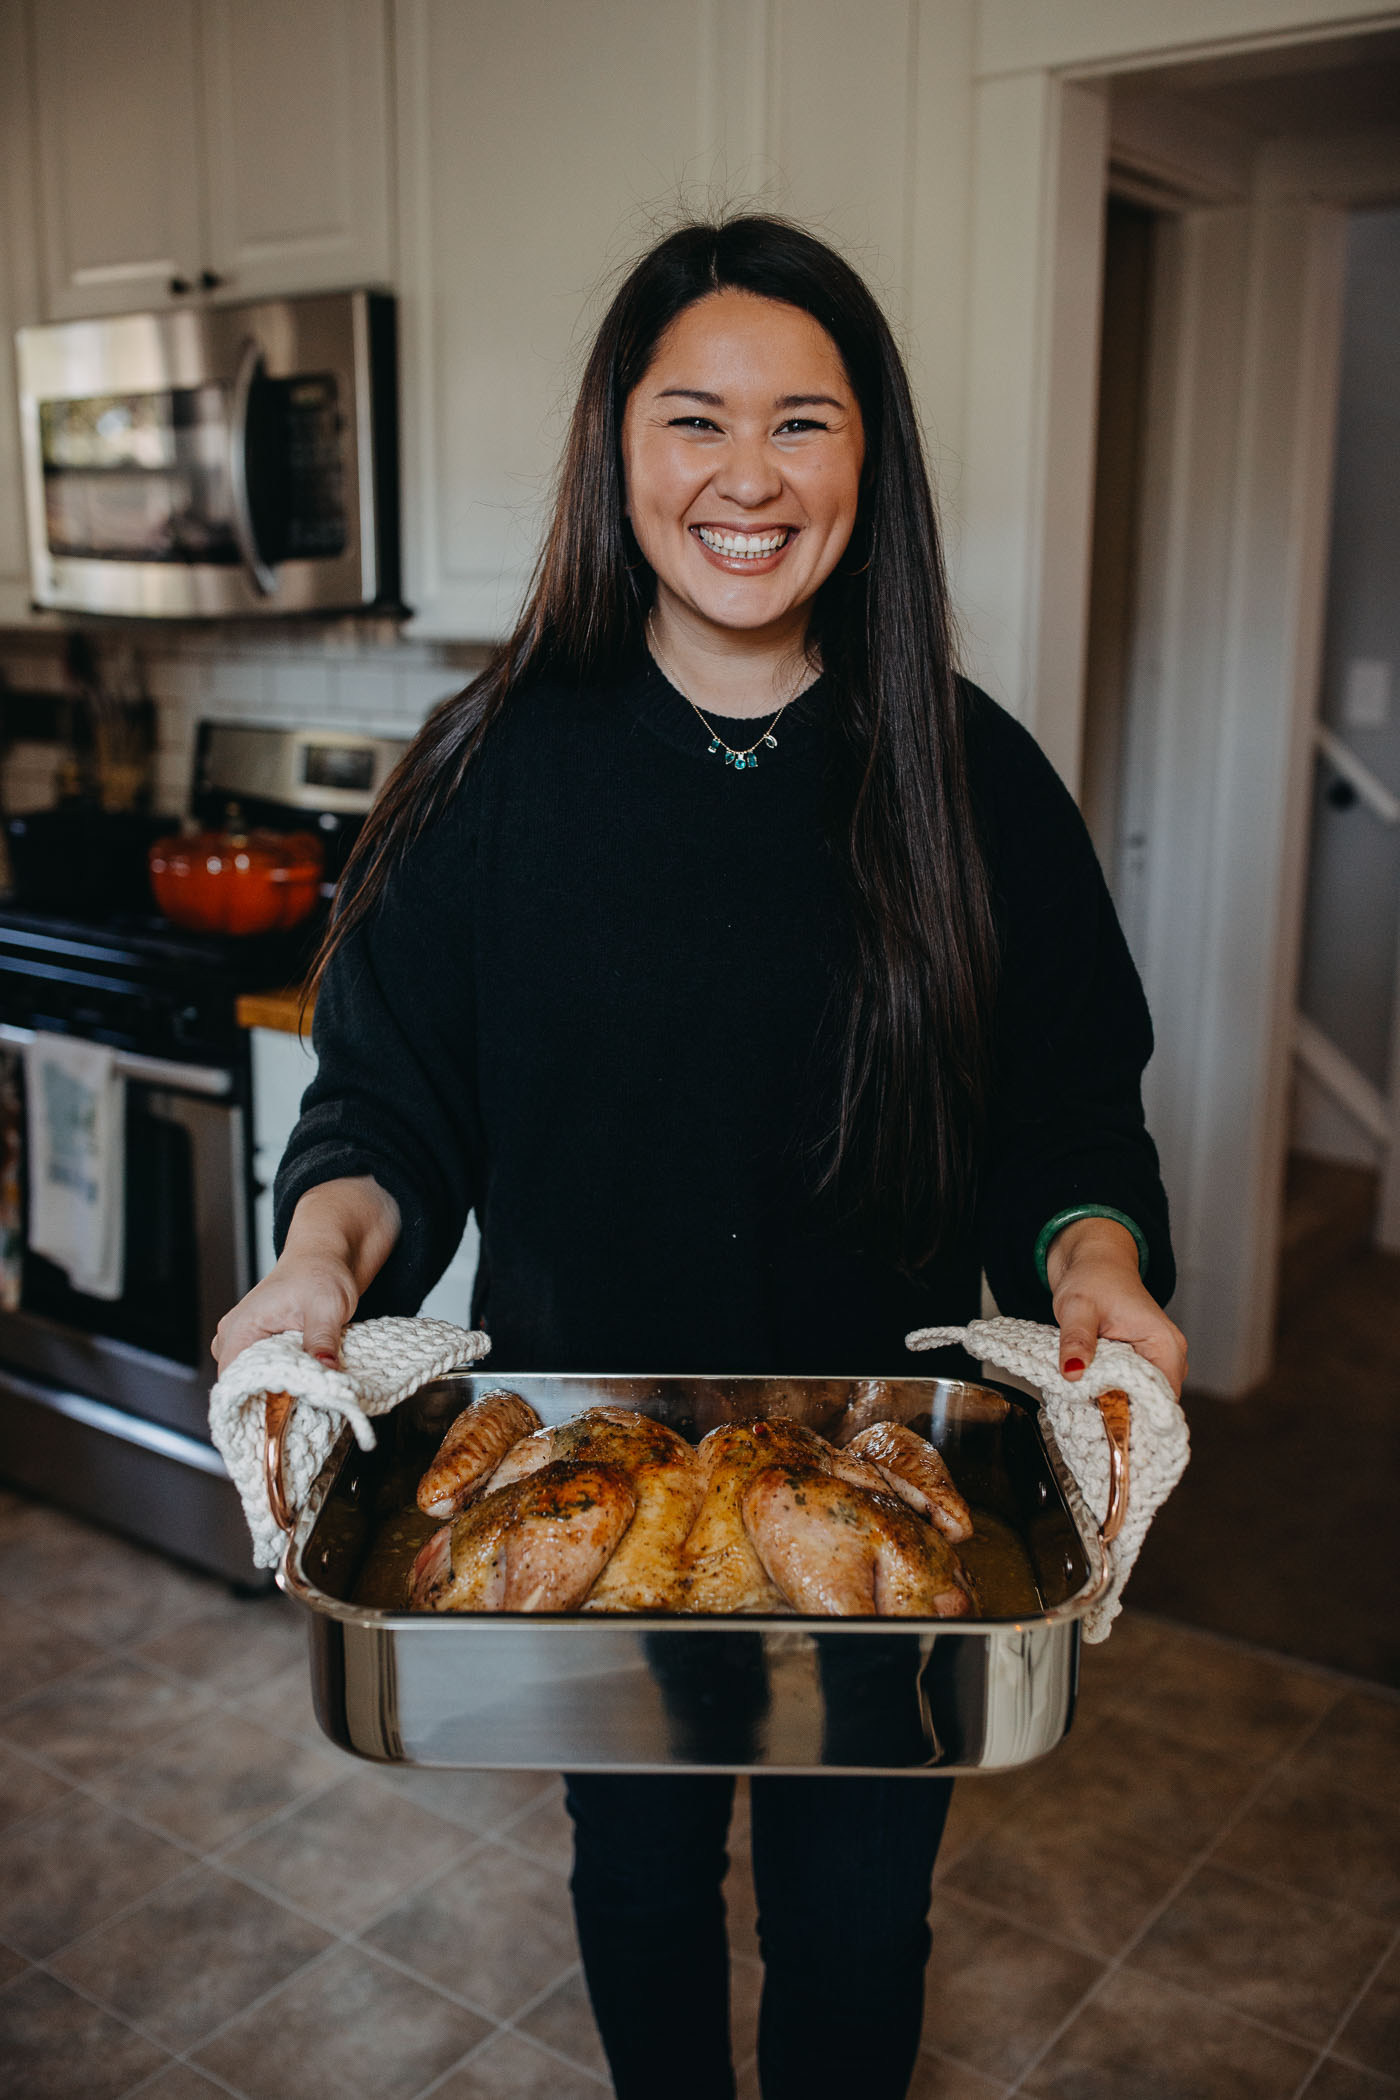 Dark-haired woman in a black sweater holding a roasting dish containing a spatchcocked (butterflied) turkey.